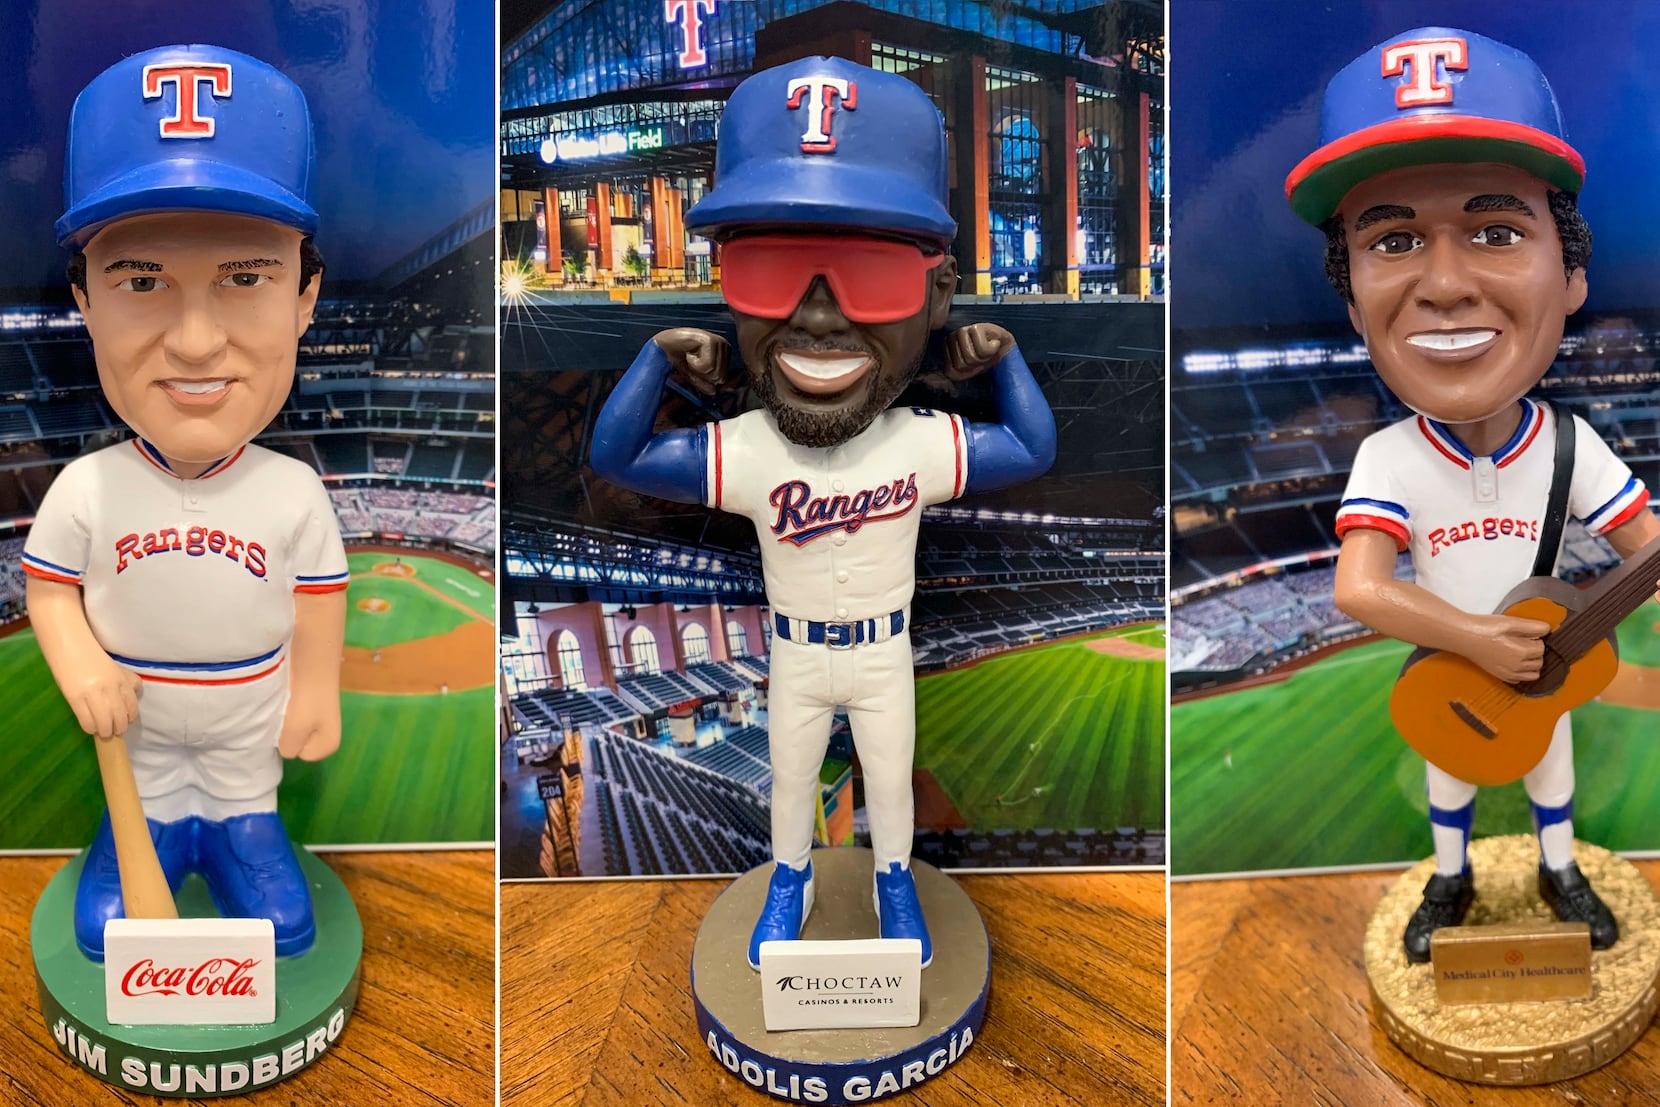 Best of Astros promo schedule: Bobblehead nights, $1 hot dogs and more